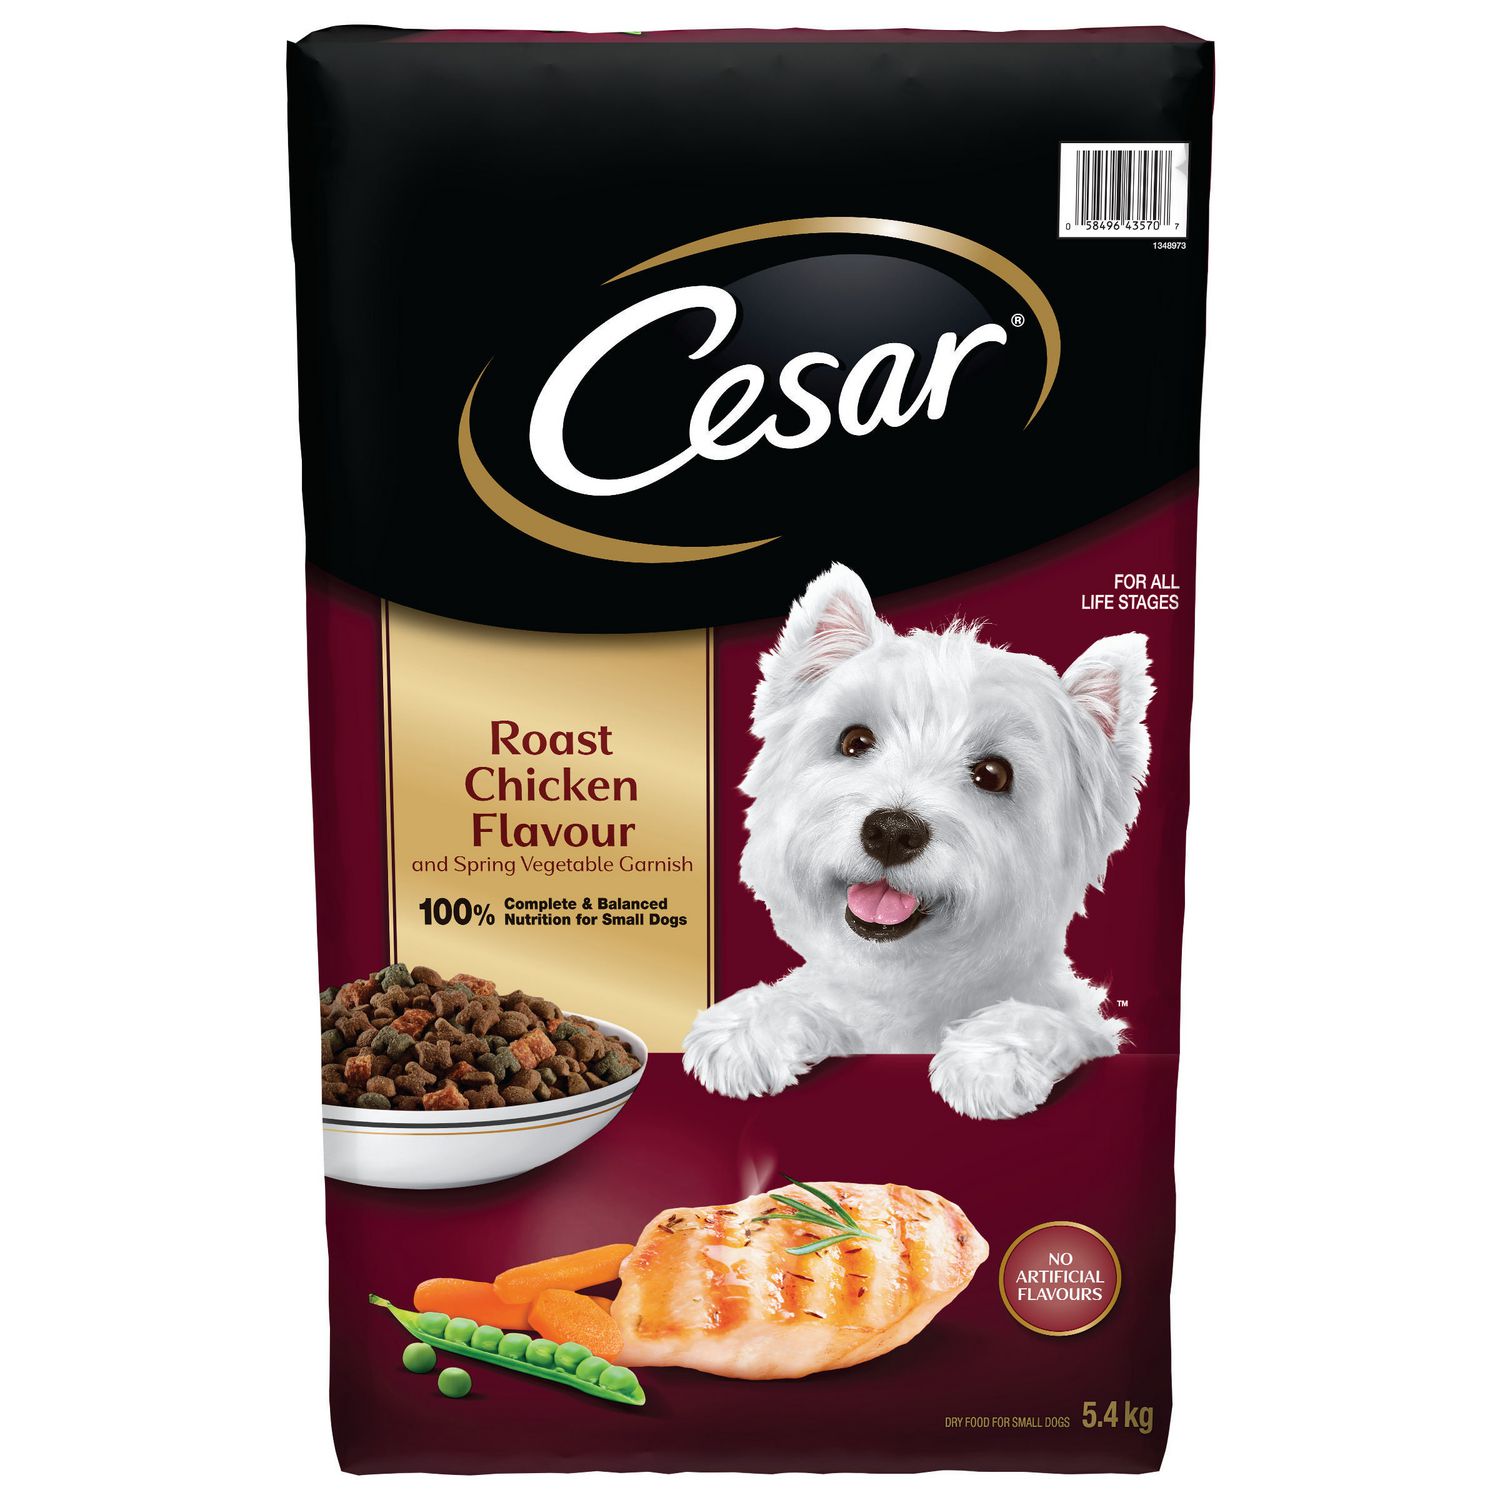 Cesar Roast Chicken Flavour Dog Food for Small Dogs ...